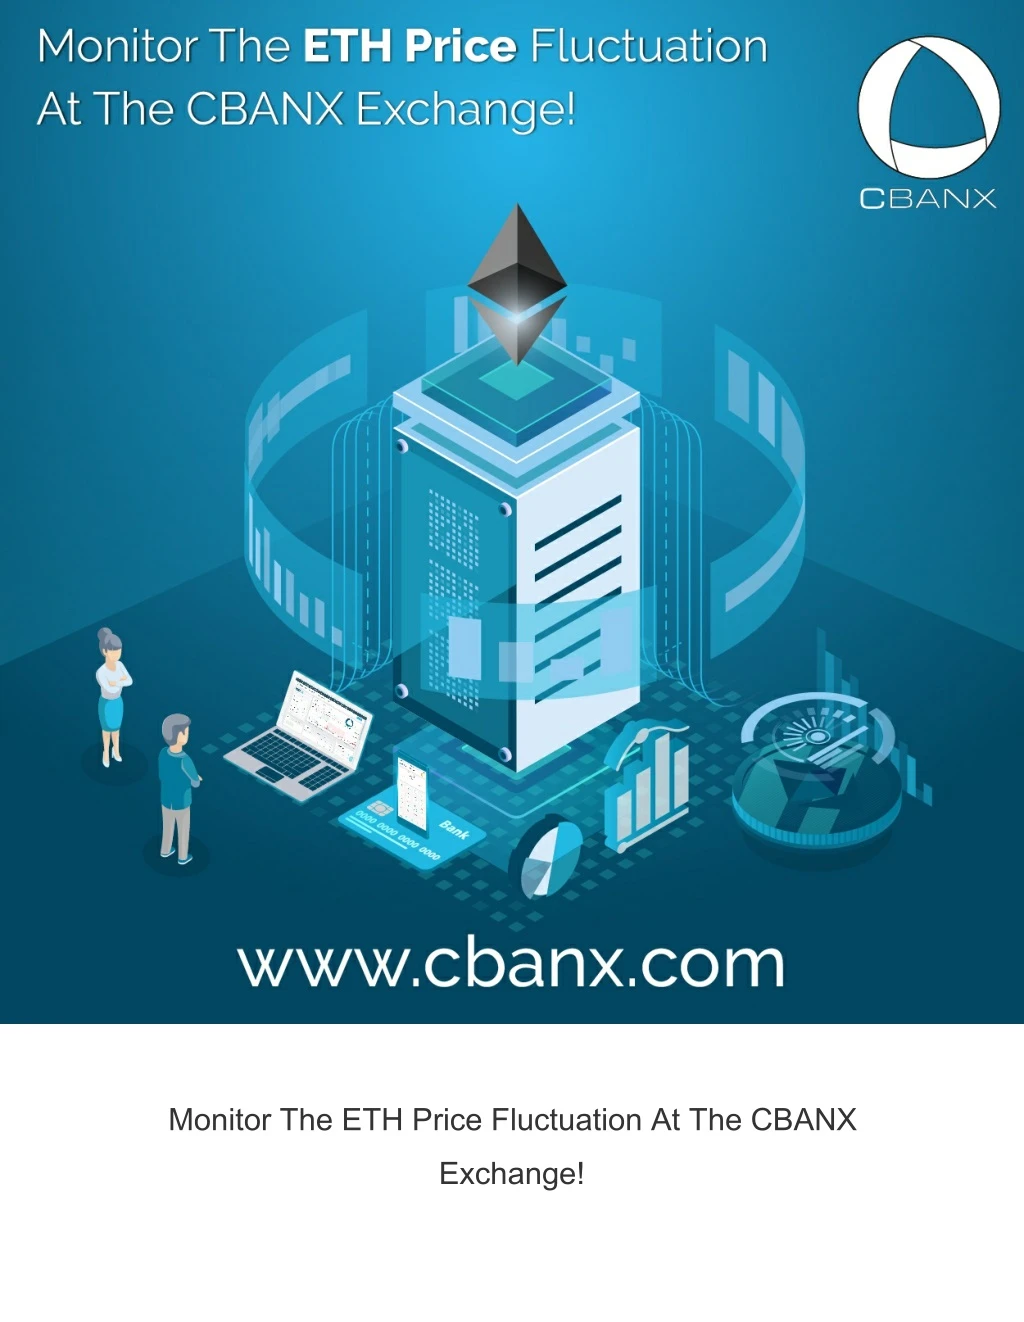 monitor the eth price fluctuation at the cbanx